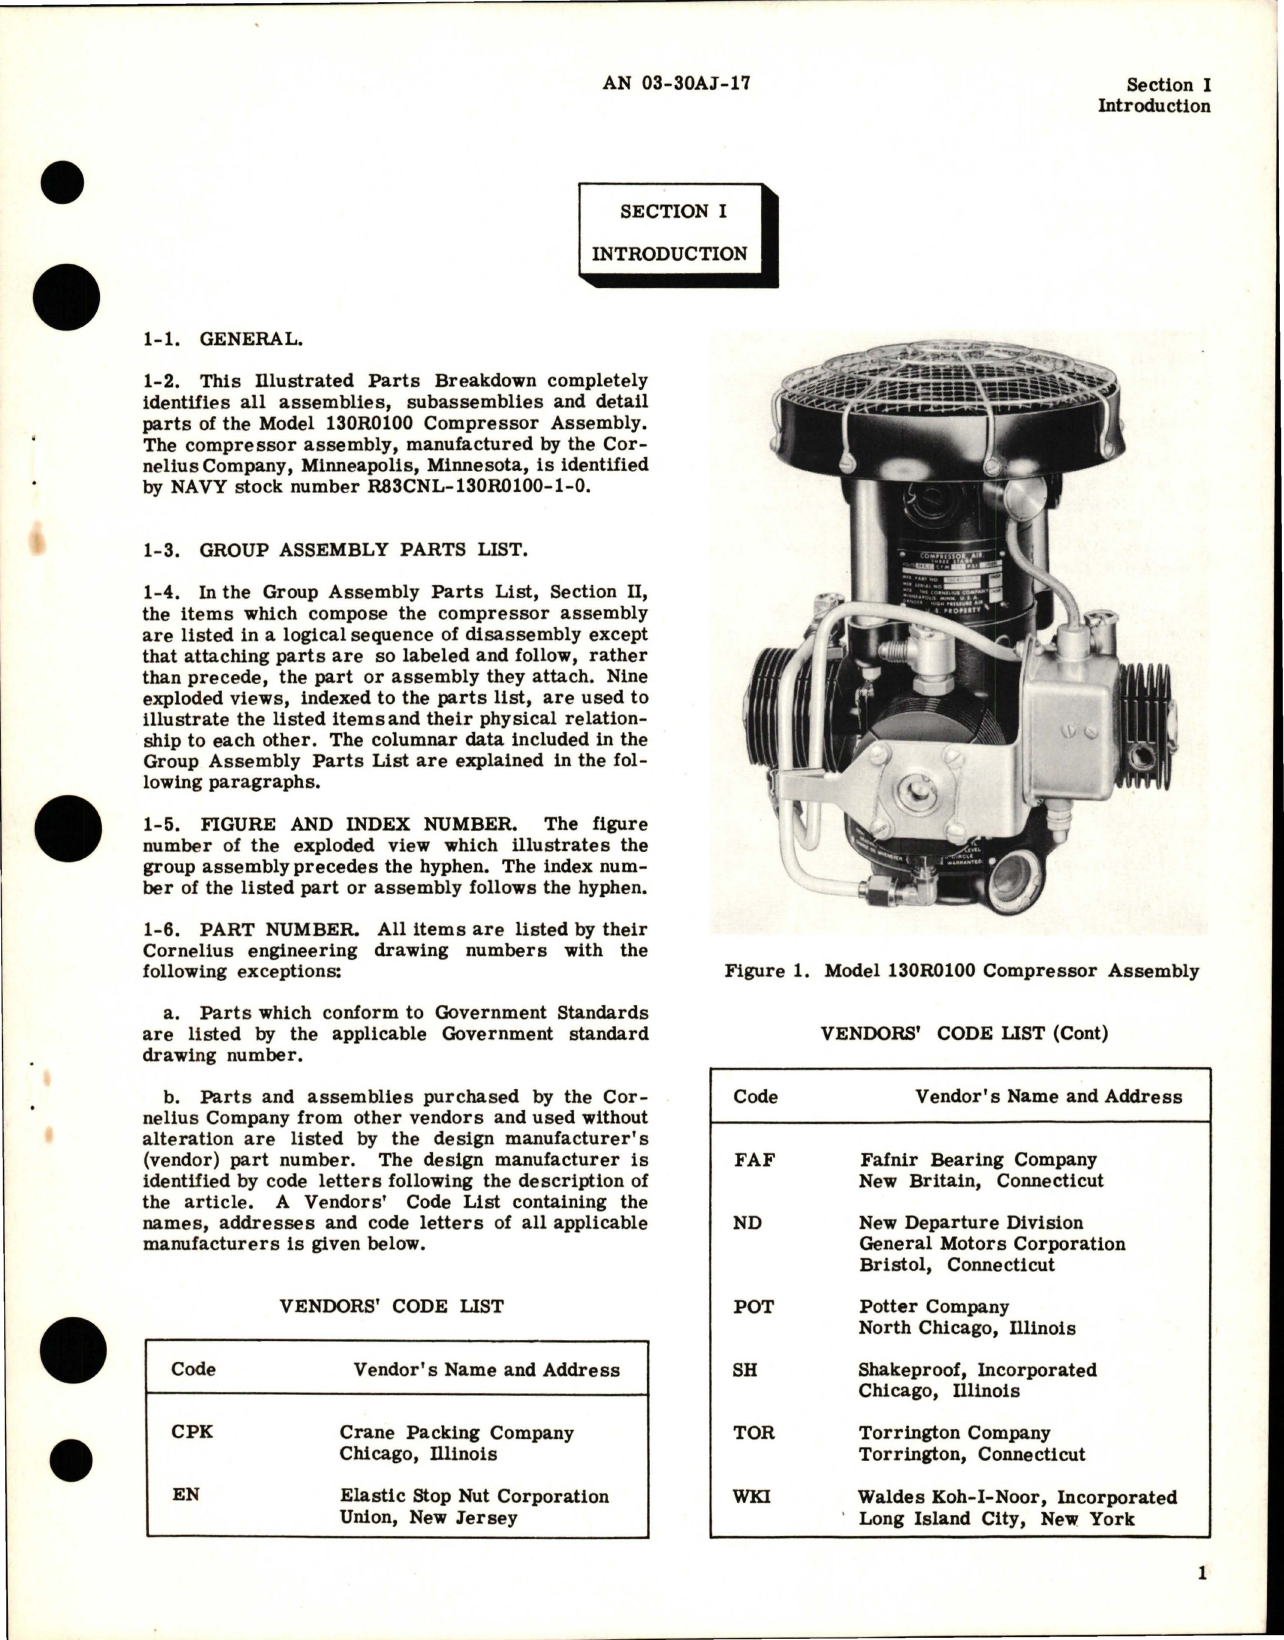 Sample page 5 from AirCorps Library document: Illustrated Parts Breakdown for Compressor - Model 130R0100-1-0